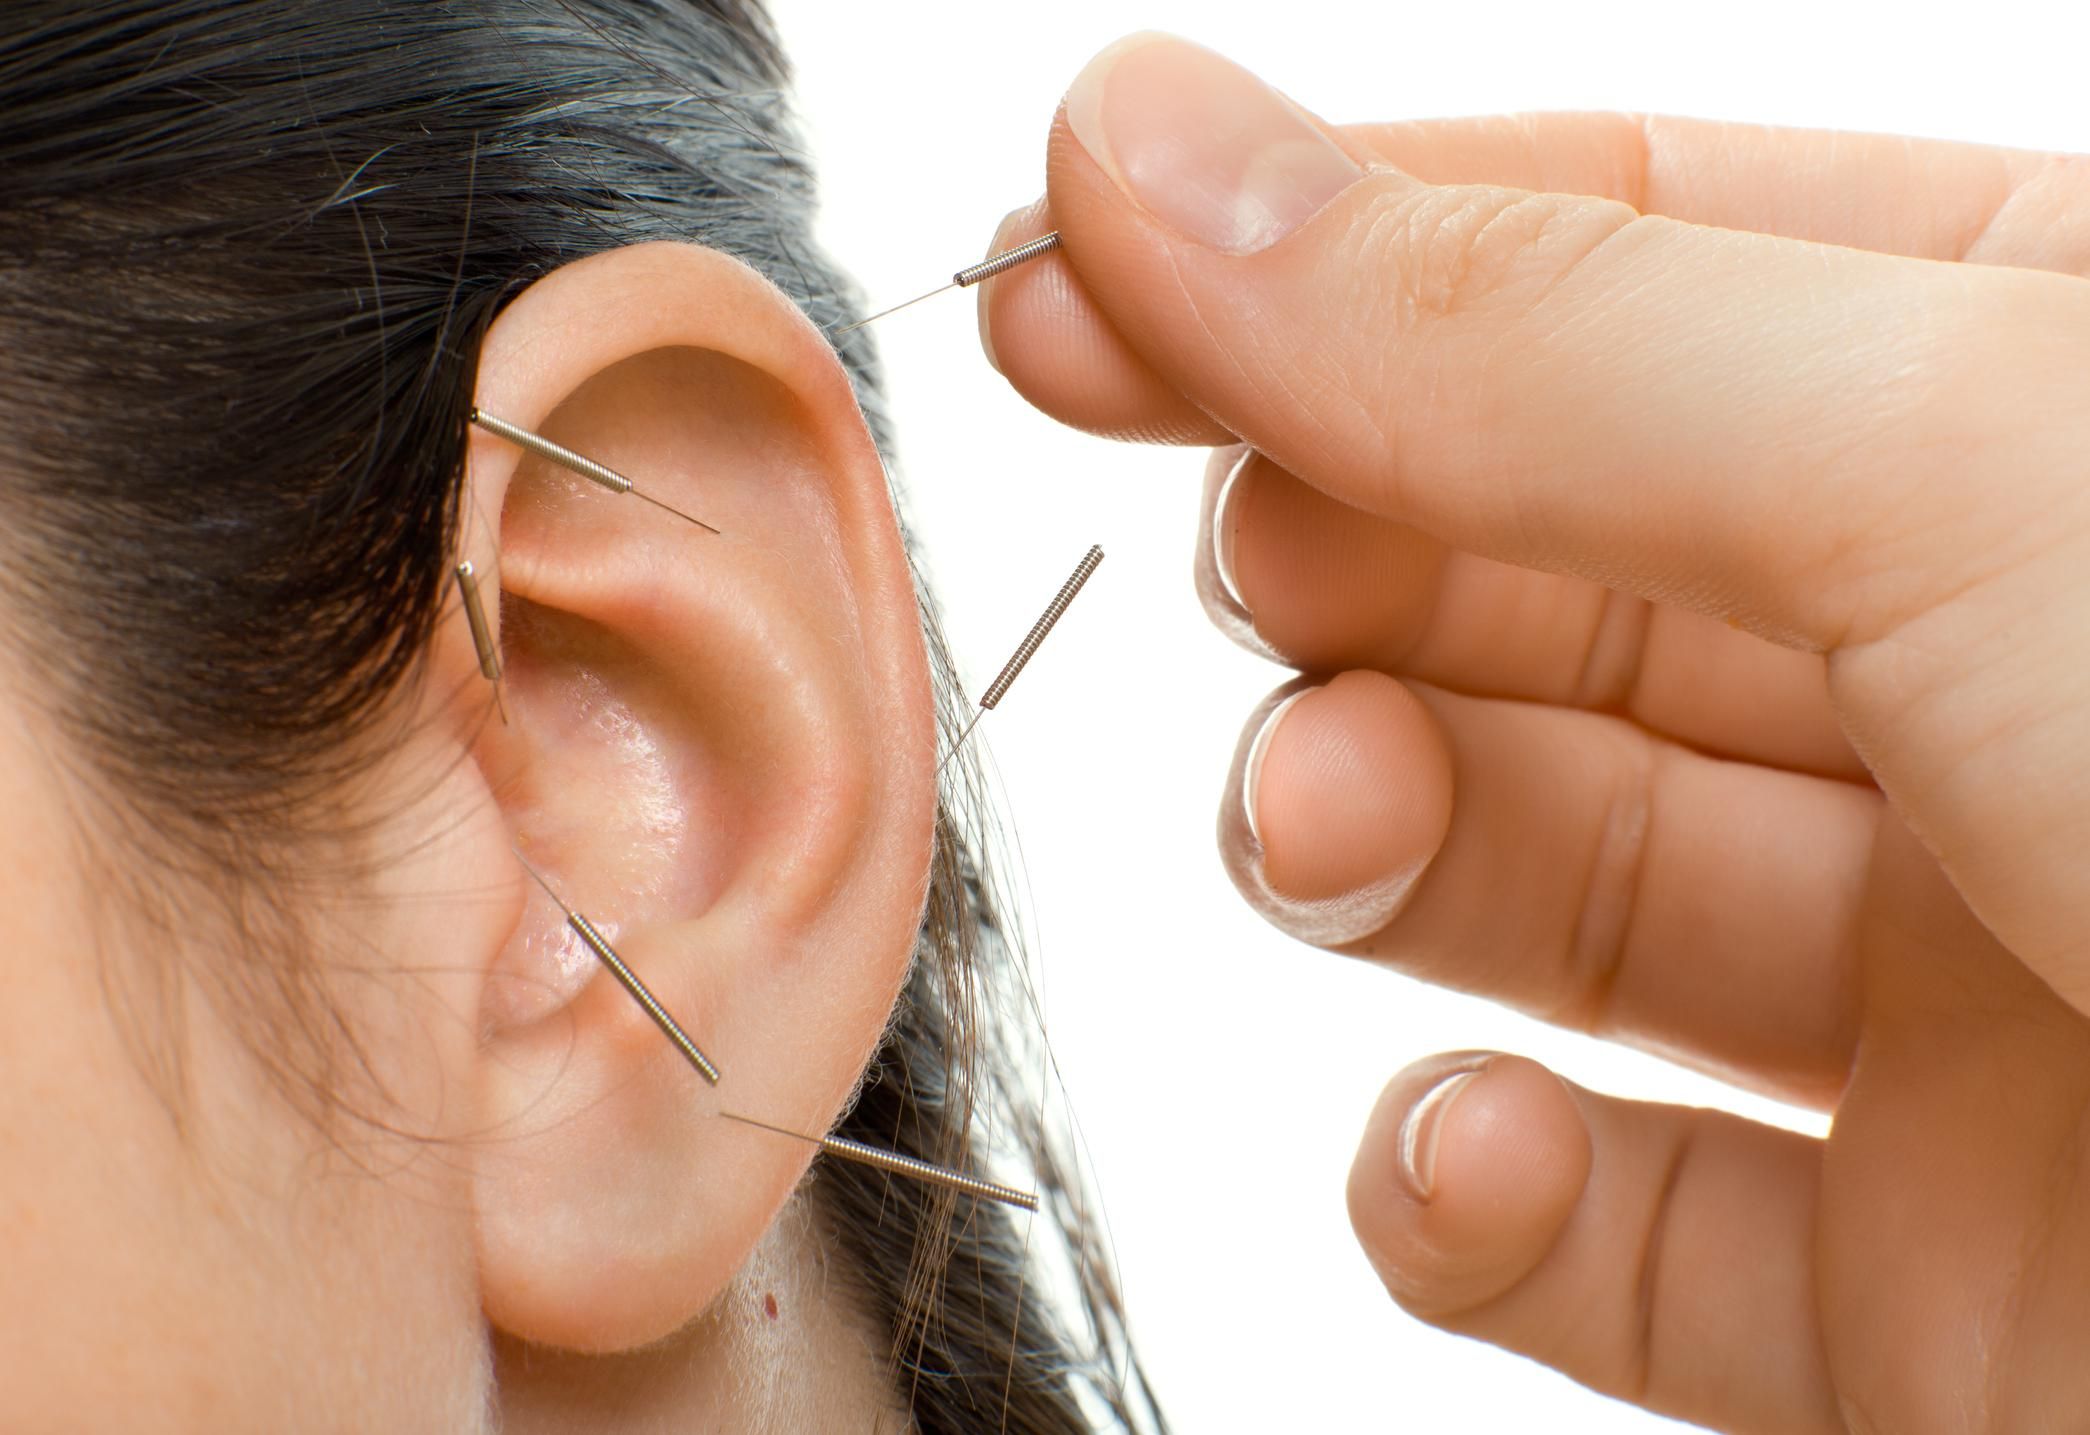 Acupuncture needles in the ear